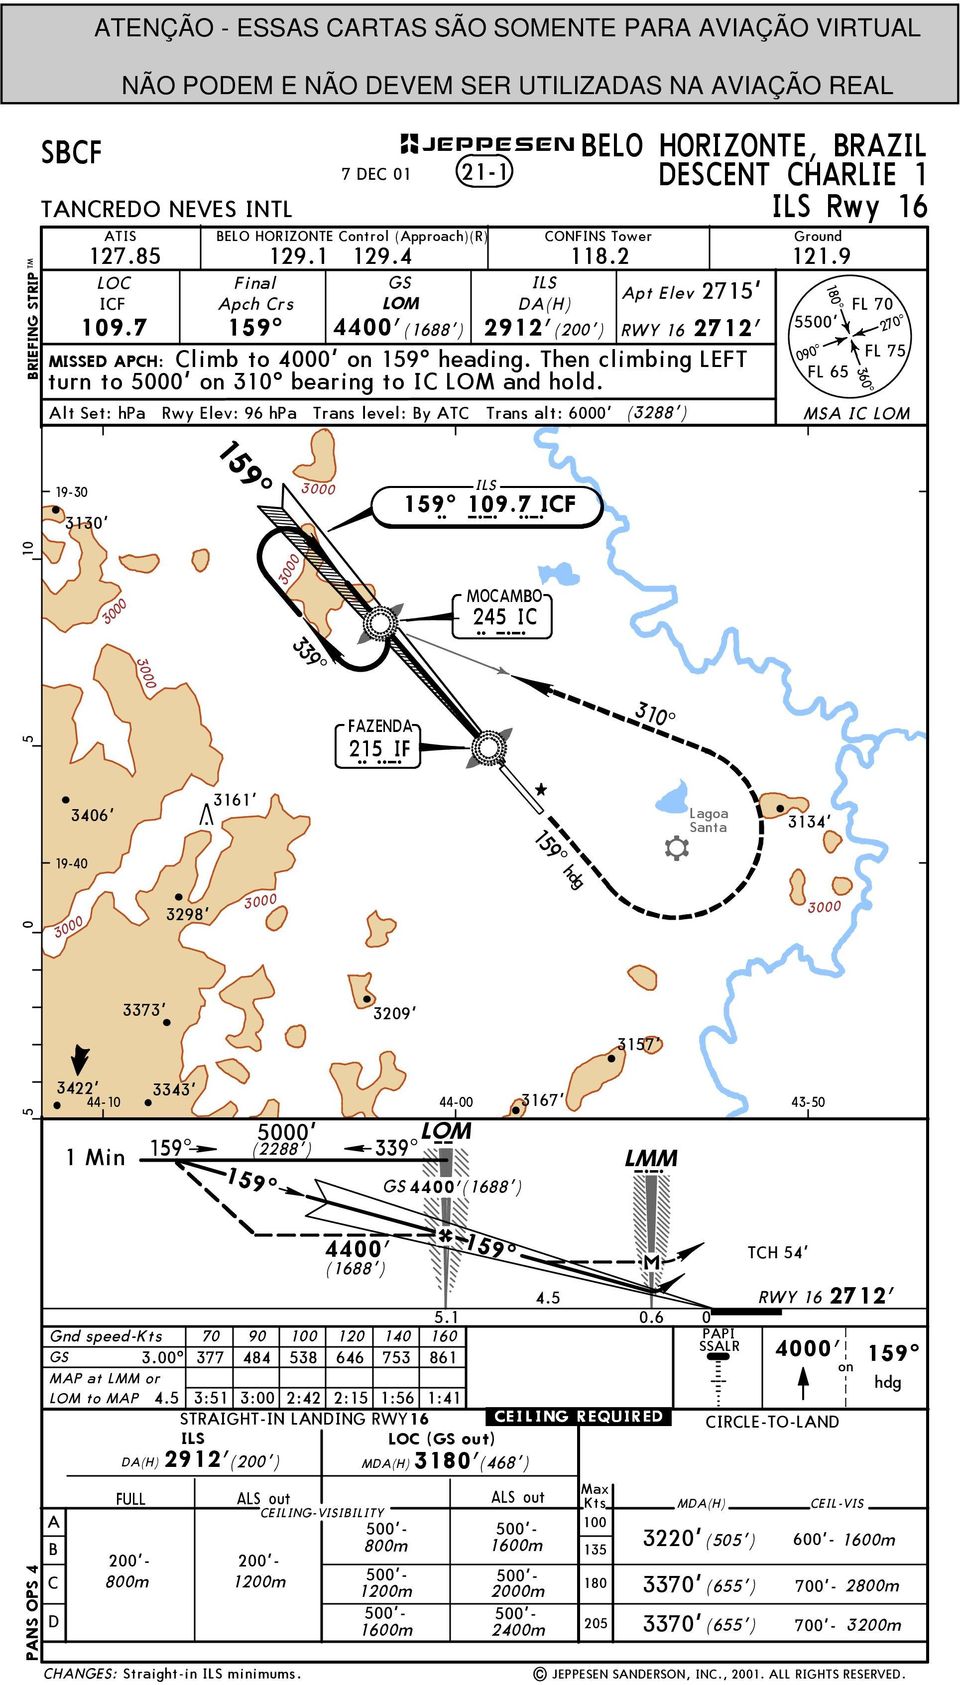 7 4400'(88') 2912'(200') RWY 2712' MISSE PH: limb to 4000' on heading. Then climbing LEFT FL 65 turn to on 310^ bearing to I LOM and hold.